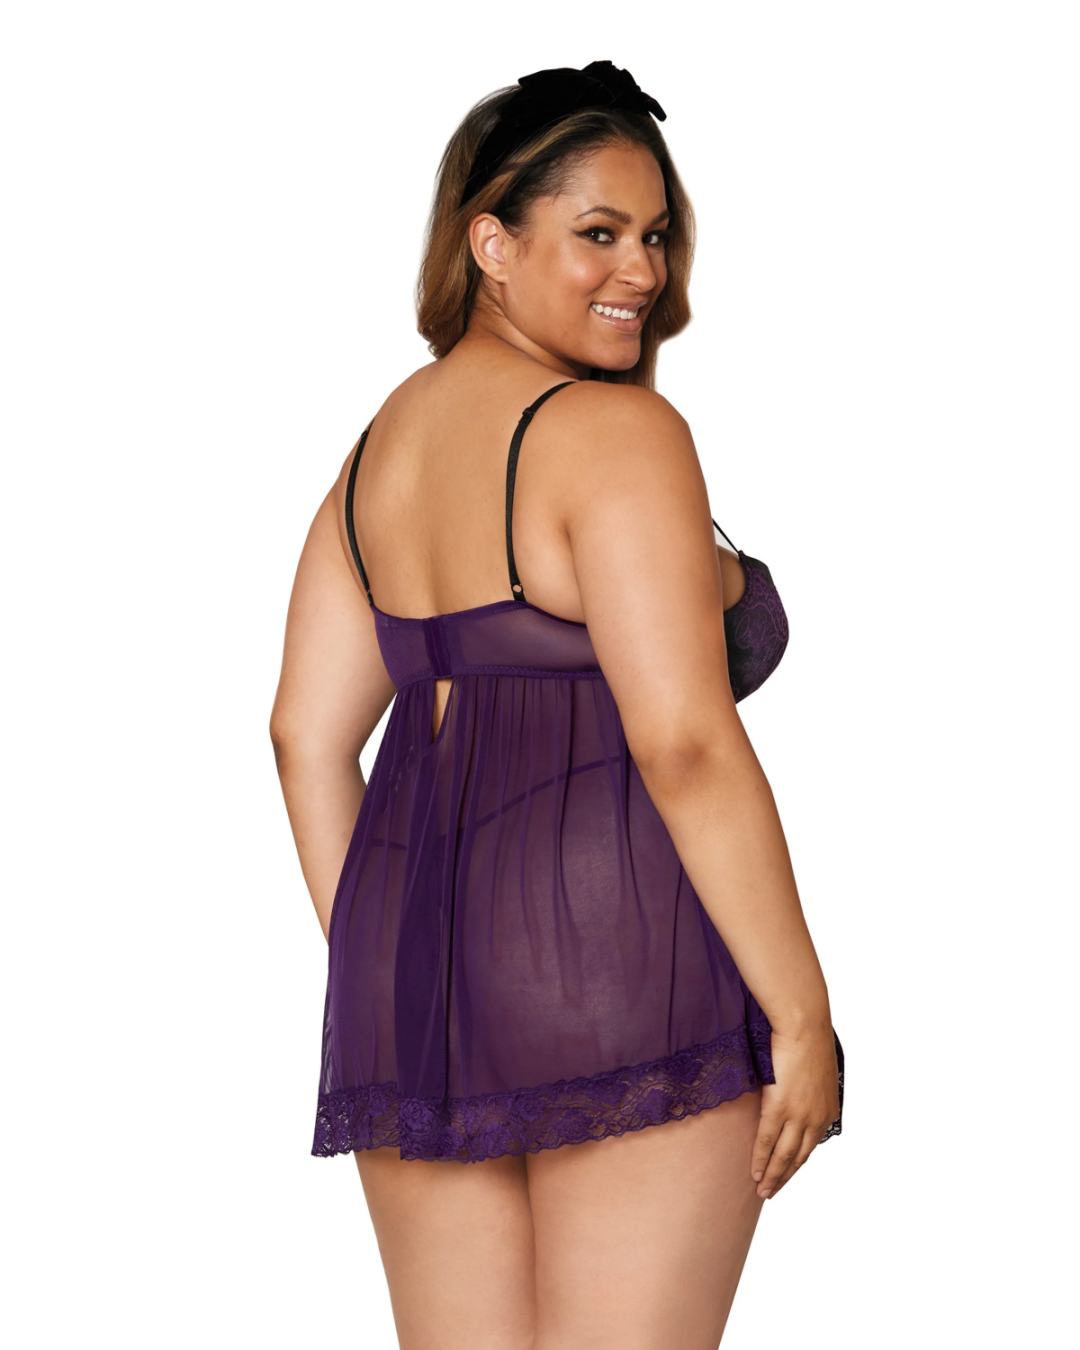 Smiling model back view wearing Dreamgirl Plus Size Contrast Lace Overlay Babydoll